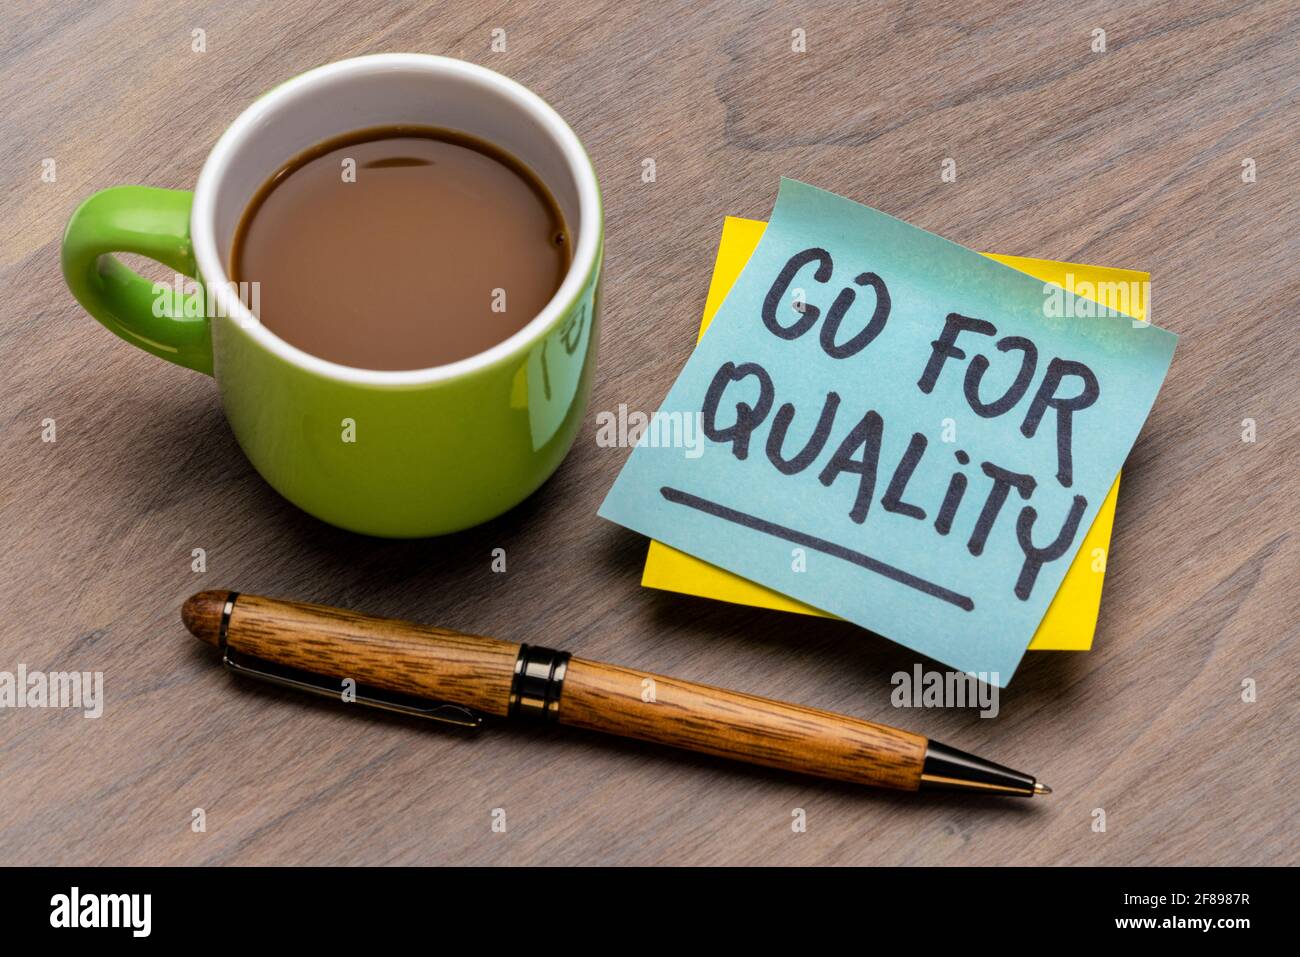 go for quality reminder note with a cup of coffee and pen, business, lifestyle and personal development concept Stock Photo